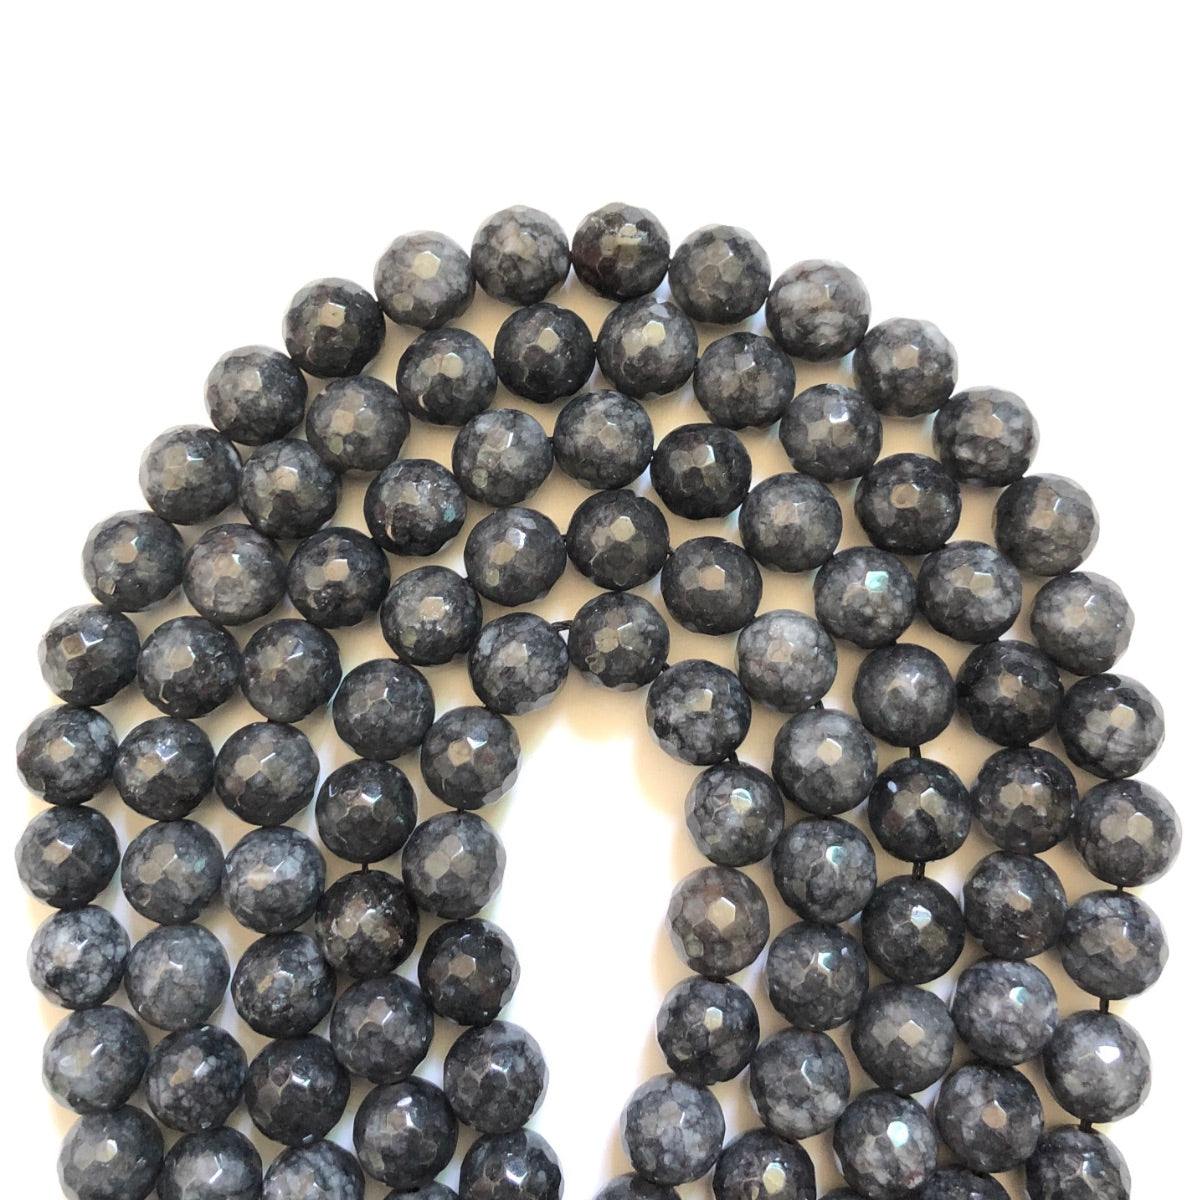 2 Strands/lot 12mm Dark Gray Faceted Jade Stone Beads Stone Beads 12mm Stone Beads Faceted Jade Beads New Beads Arrivals Charms Beads Beyond